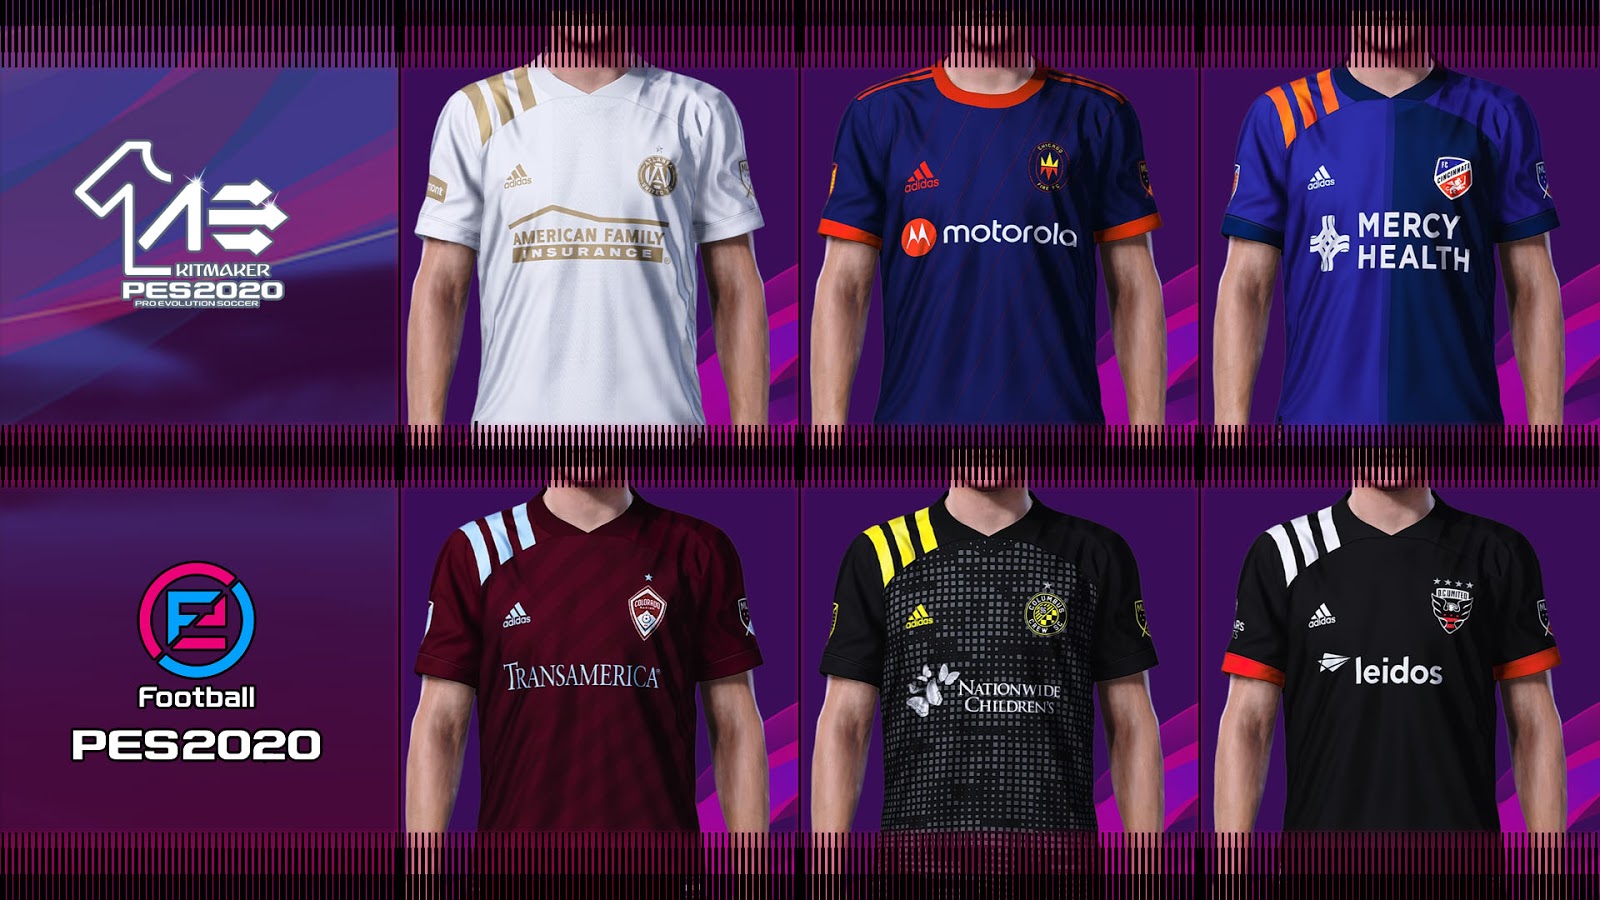 PES 2020 Major League Soccer Kitpack 2020 by AerialEdson